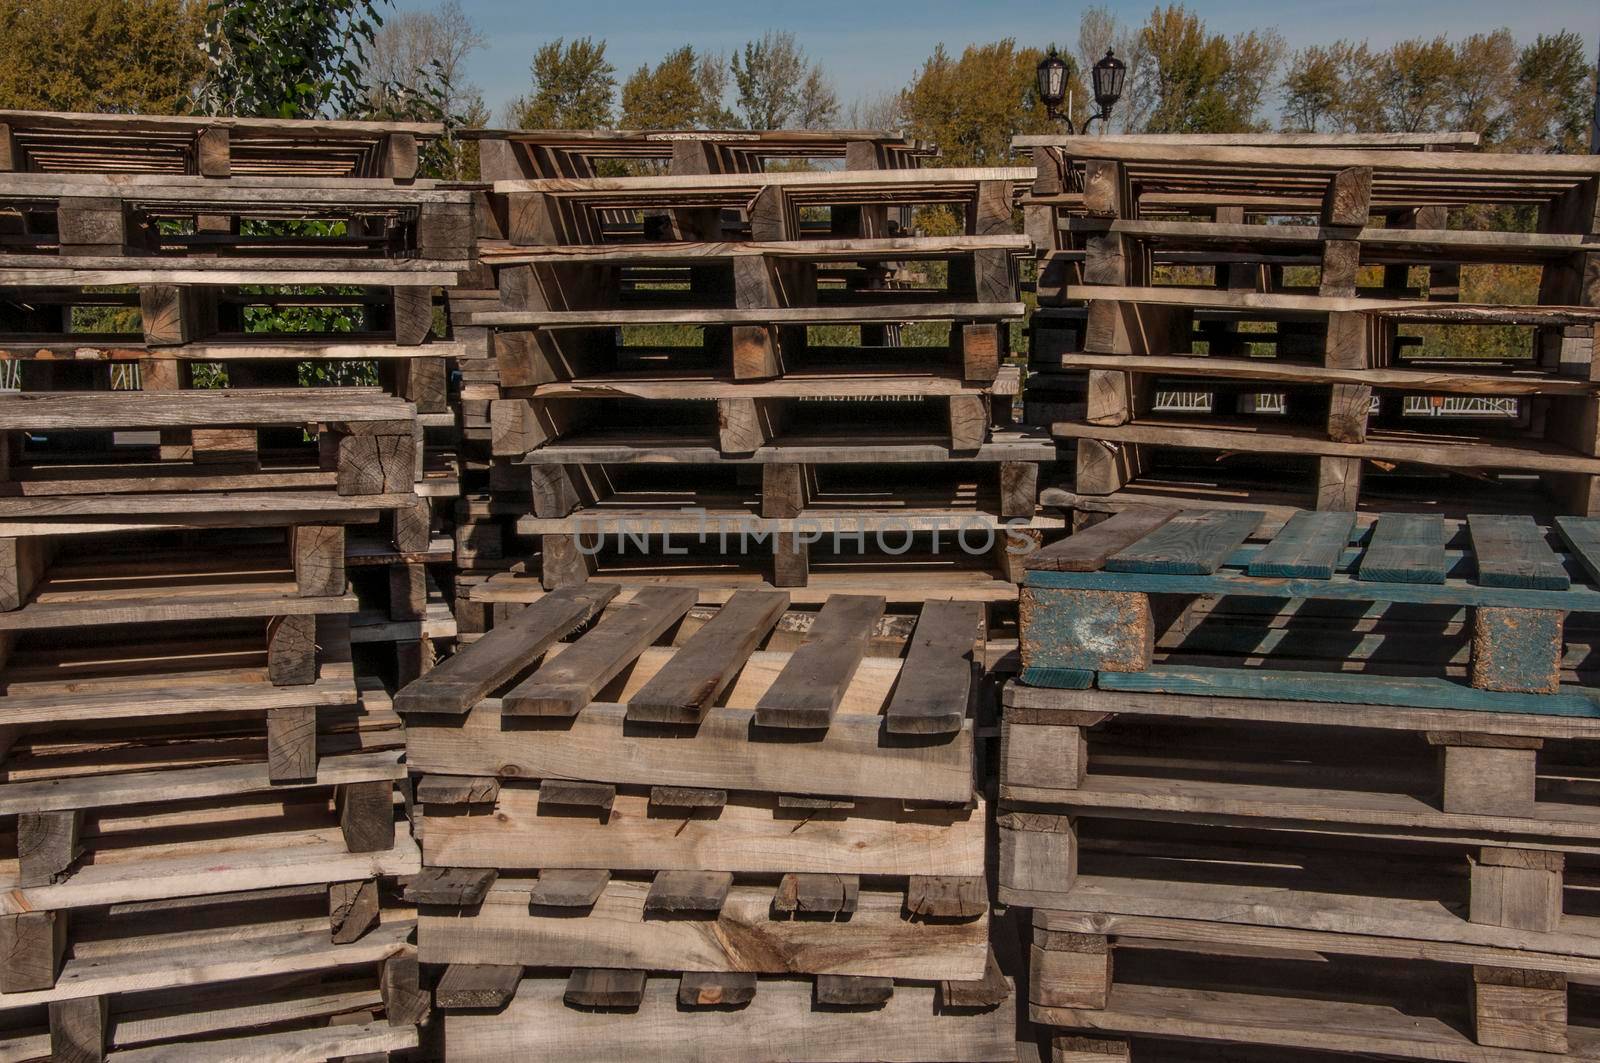 stacks of wooden pallets in a warehouse yard by inxti